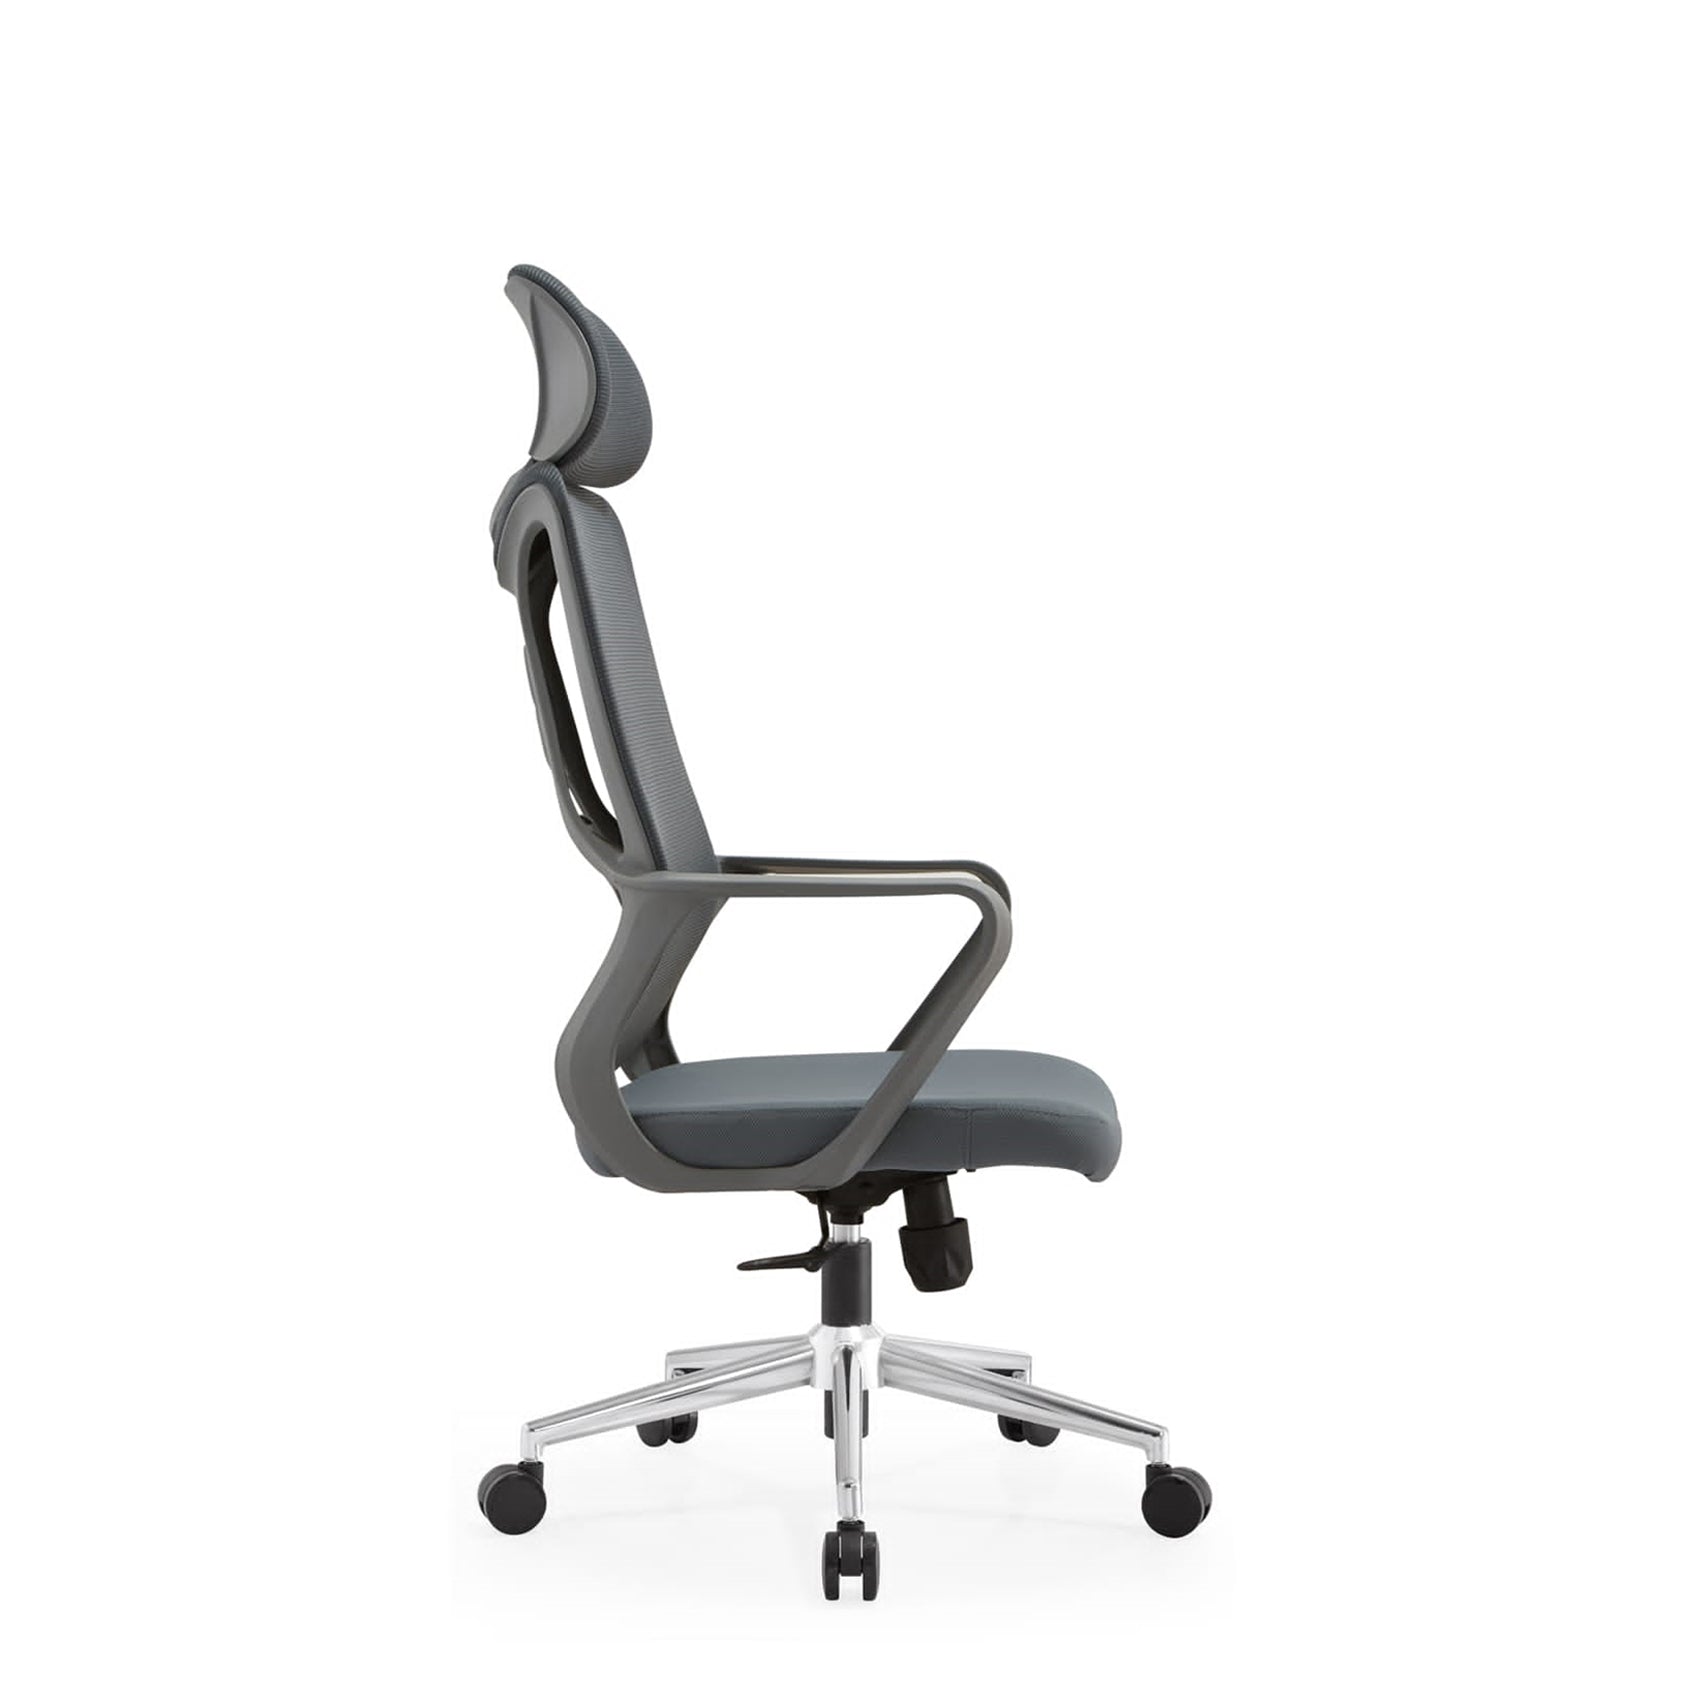 Citrion High Back Chair Executive Chairs - makemychairs